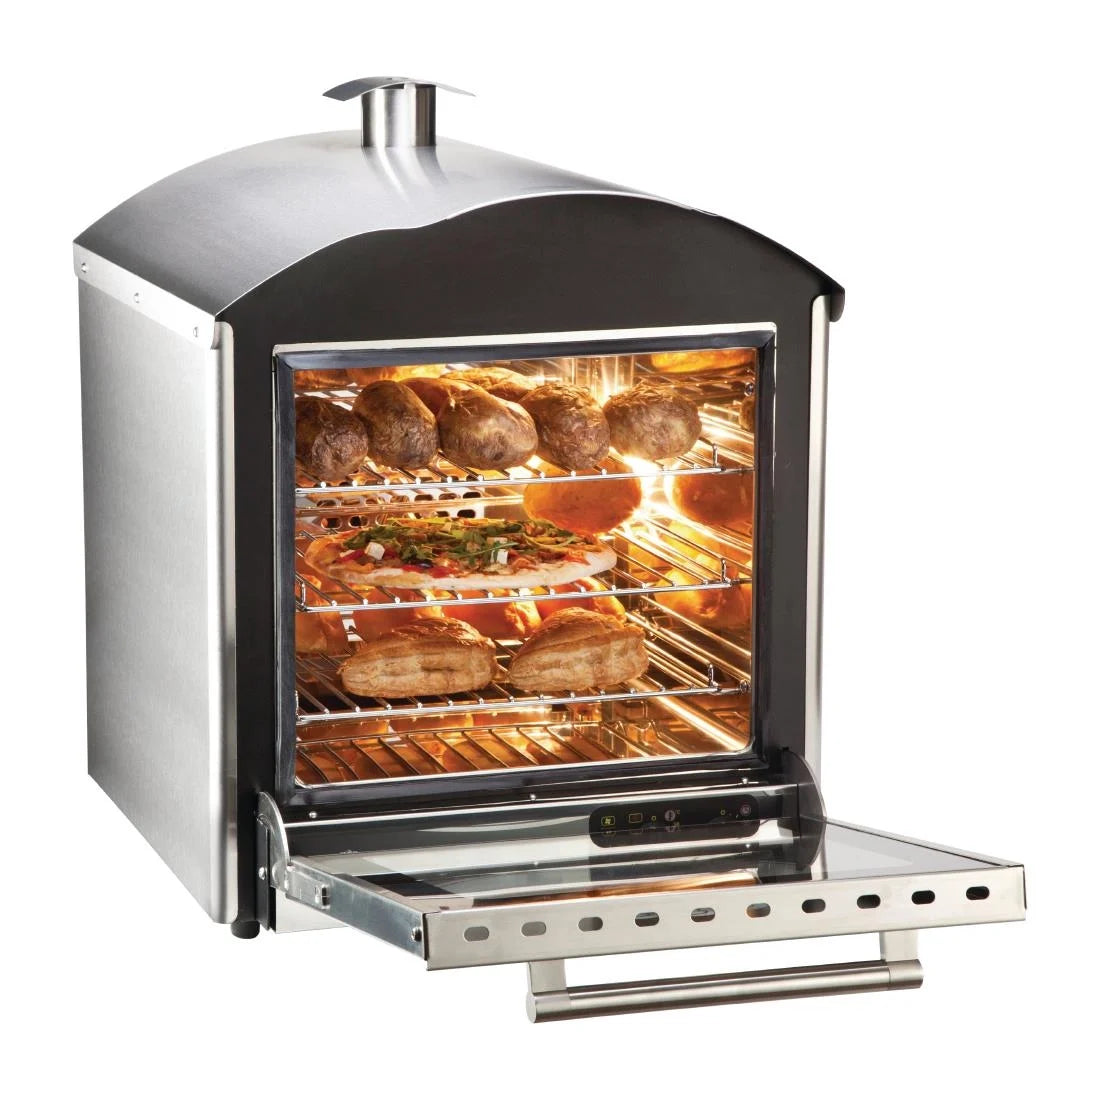 King Edward Bake King Solo Oven Stainless Steel BKS-SS.Product Ref:00676.Model:BKS-SS. 🚚 3-5 Days Delivery